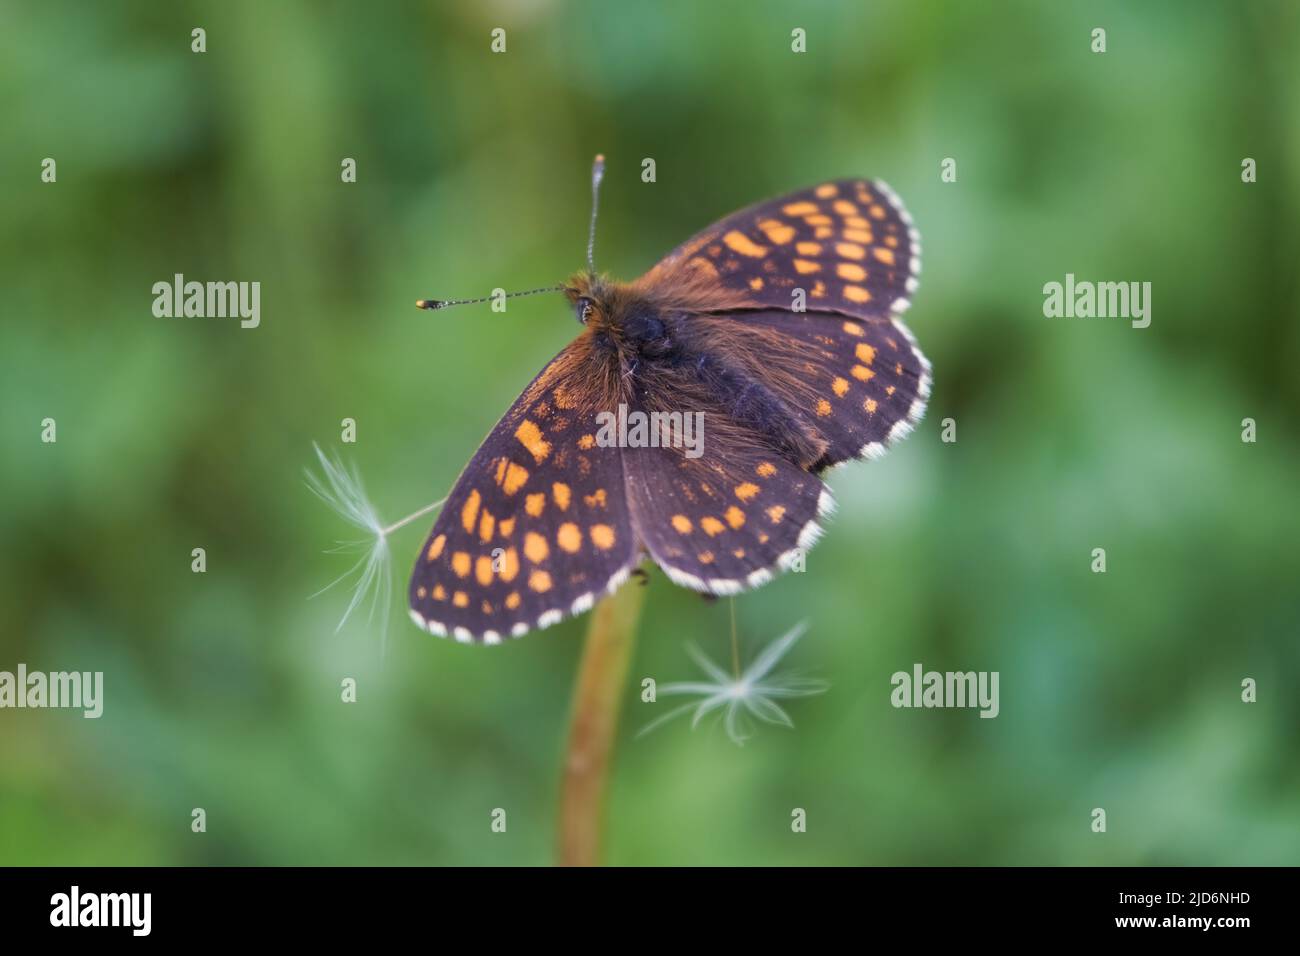 Northern Brown Argus butterfly, Latin name Plebeius artaxerxes on a green leaf close-up. Stock Photo